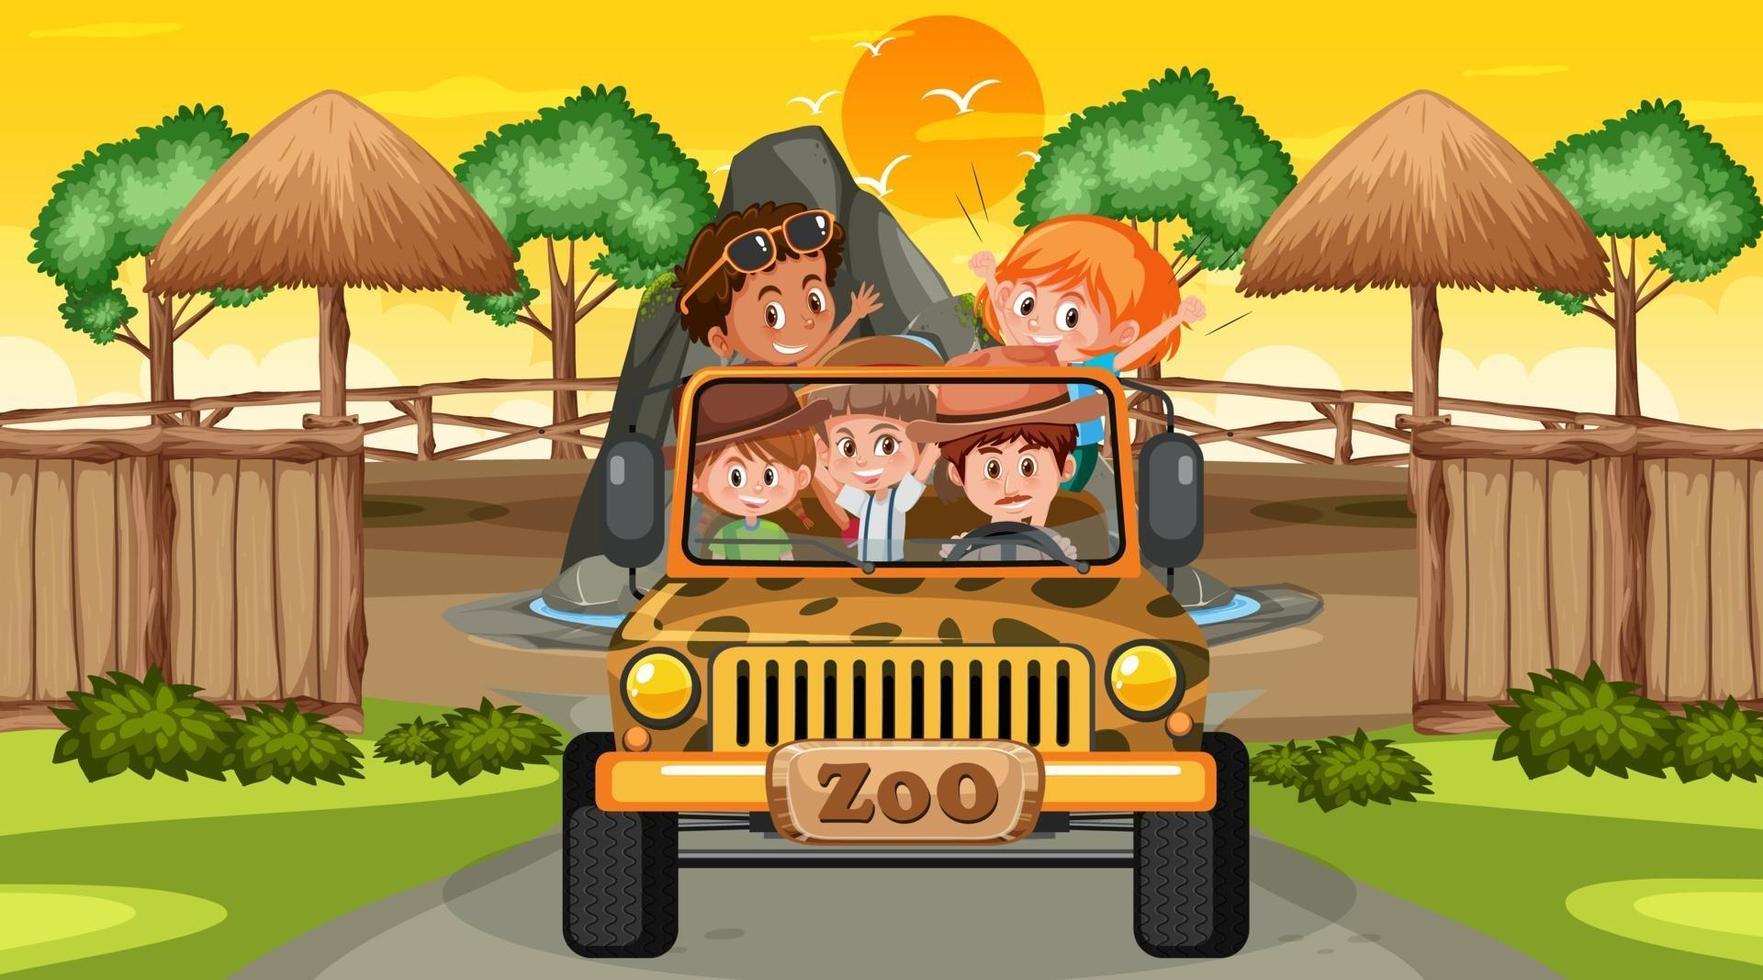 Zoo at sunset time scene with many kids in a jeep car vector